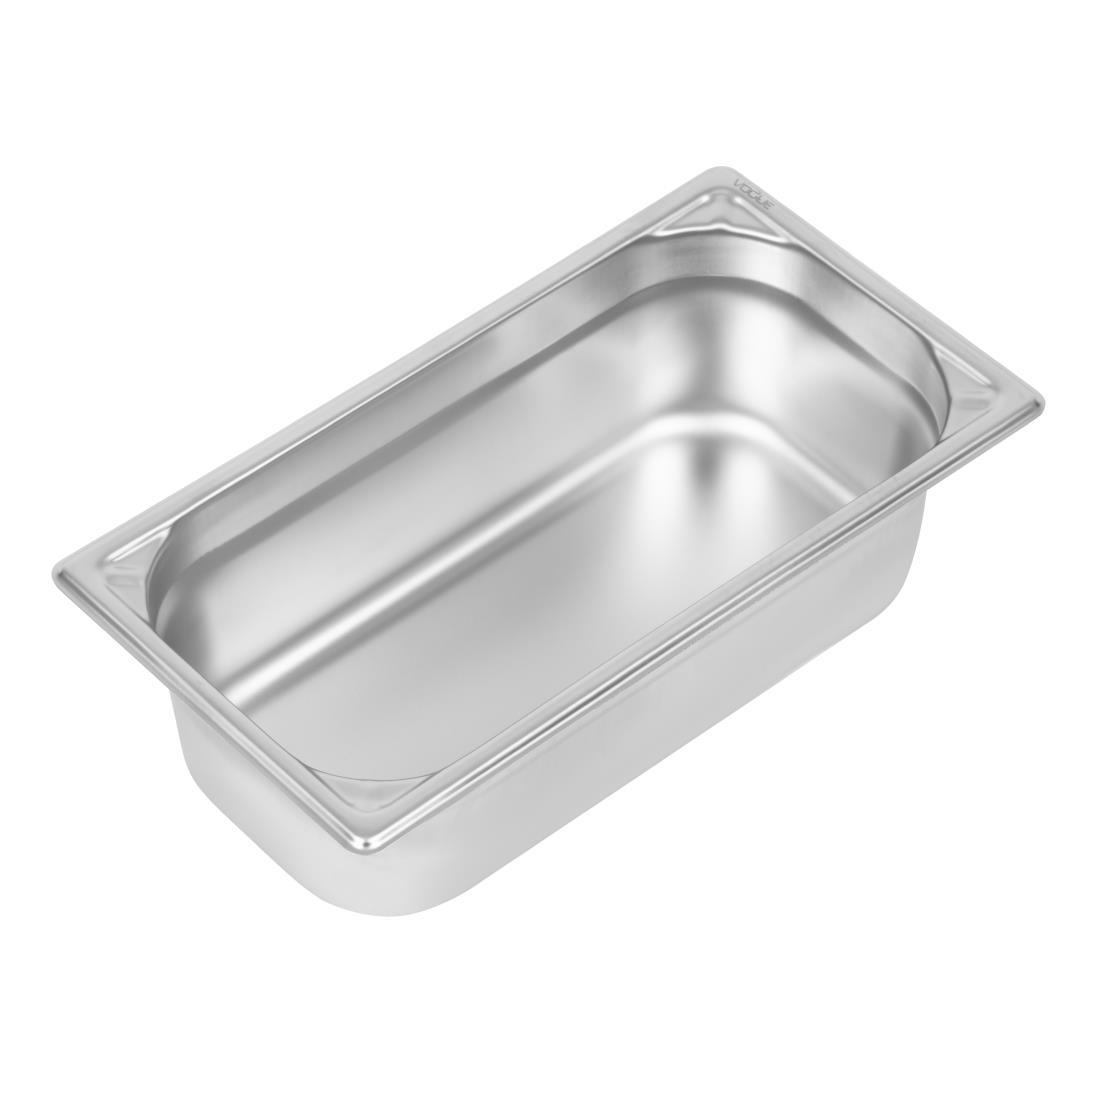 Vogue Heavy Duty Stainless Steel 1/3 Gastronorm Pan 100mm - DW443  - 1